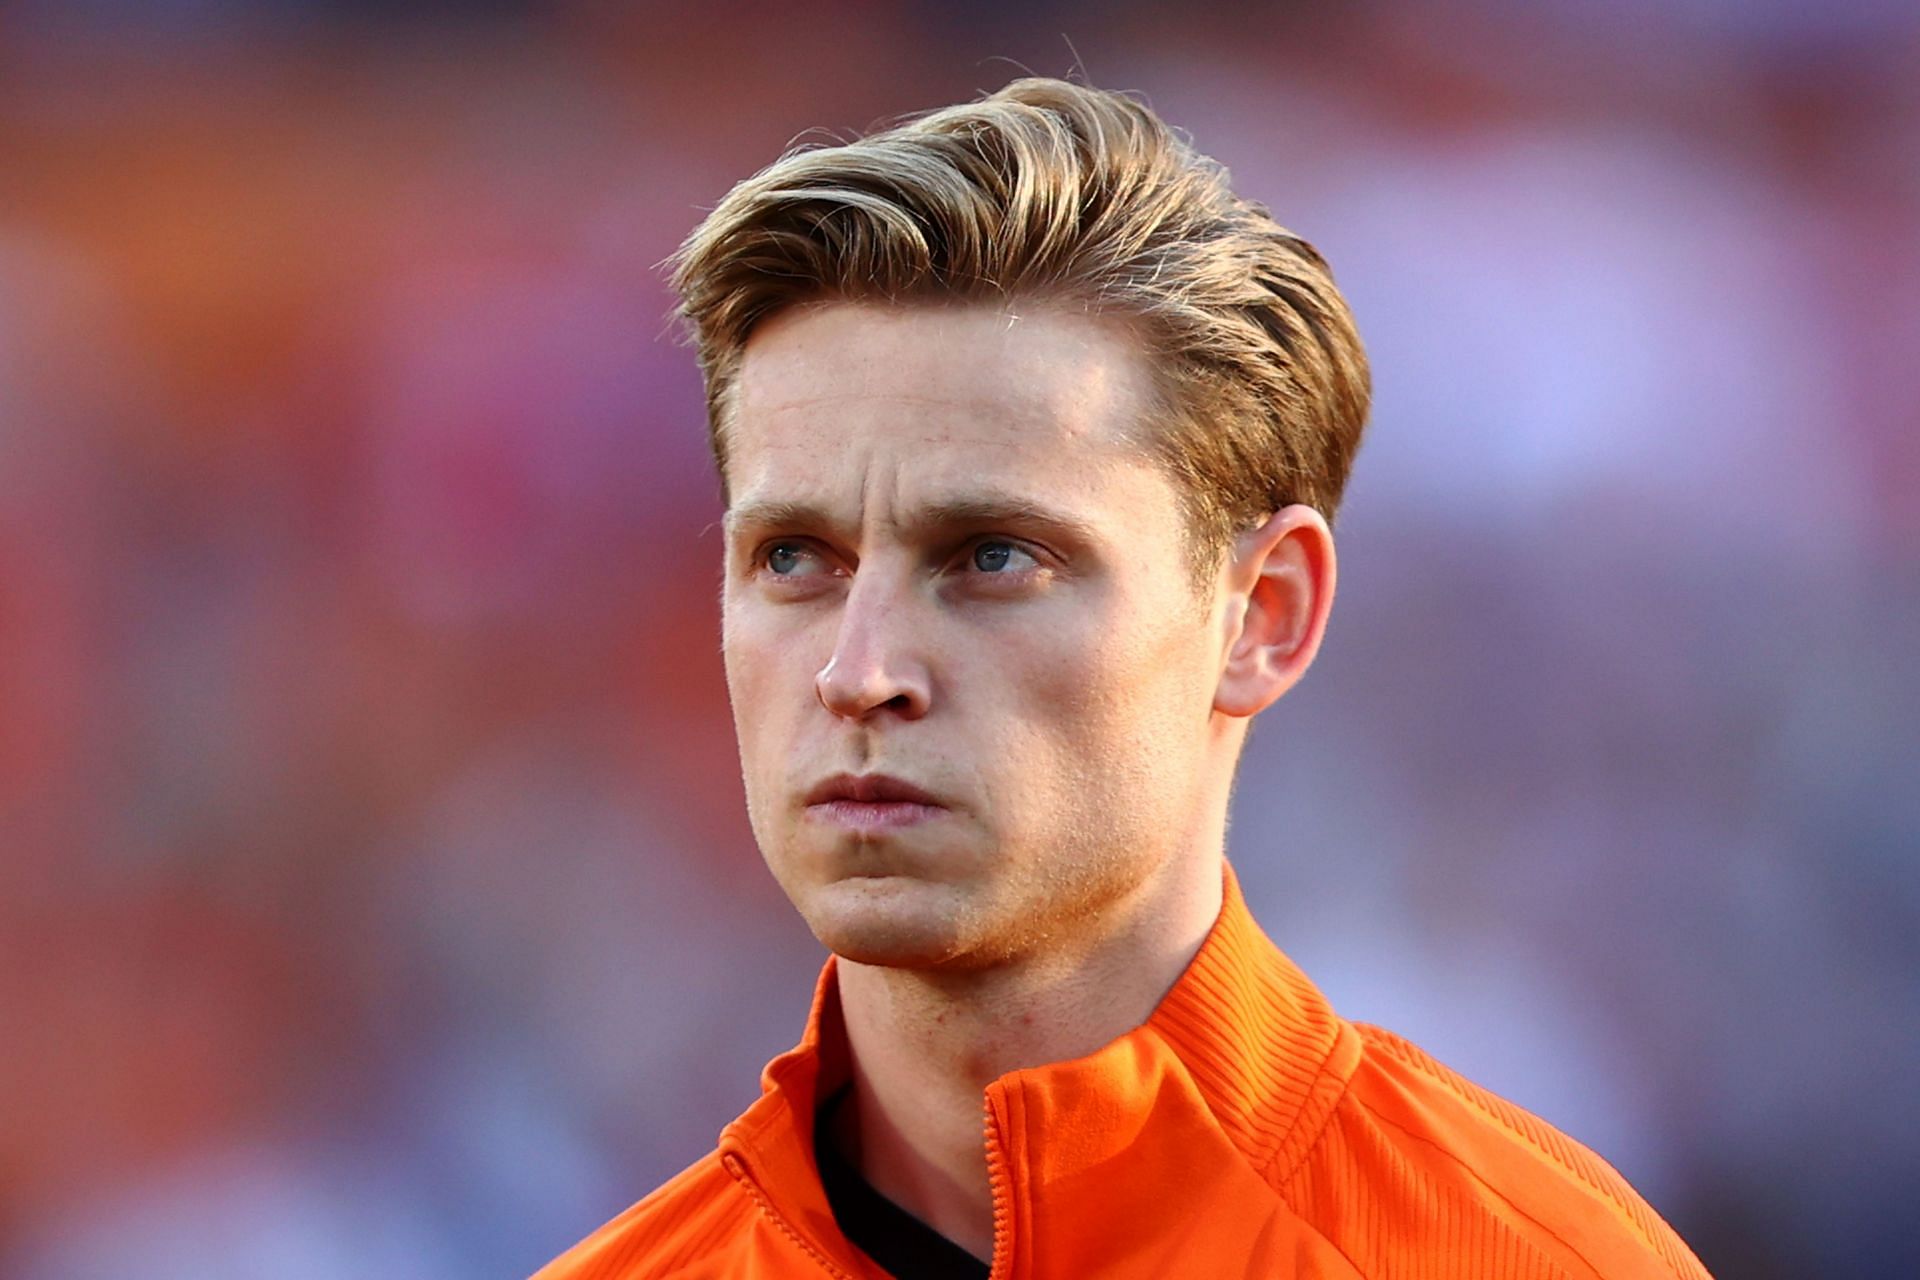 Frenkie de Jong could arrive at Old Trafford this summer.